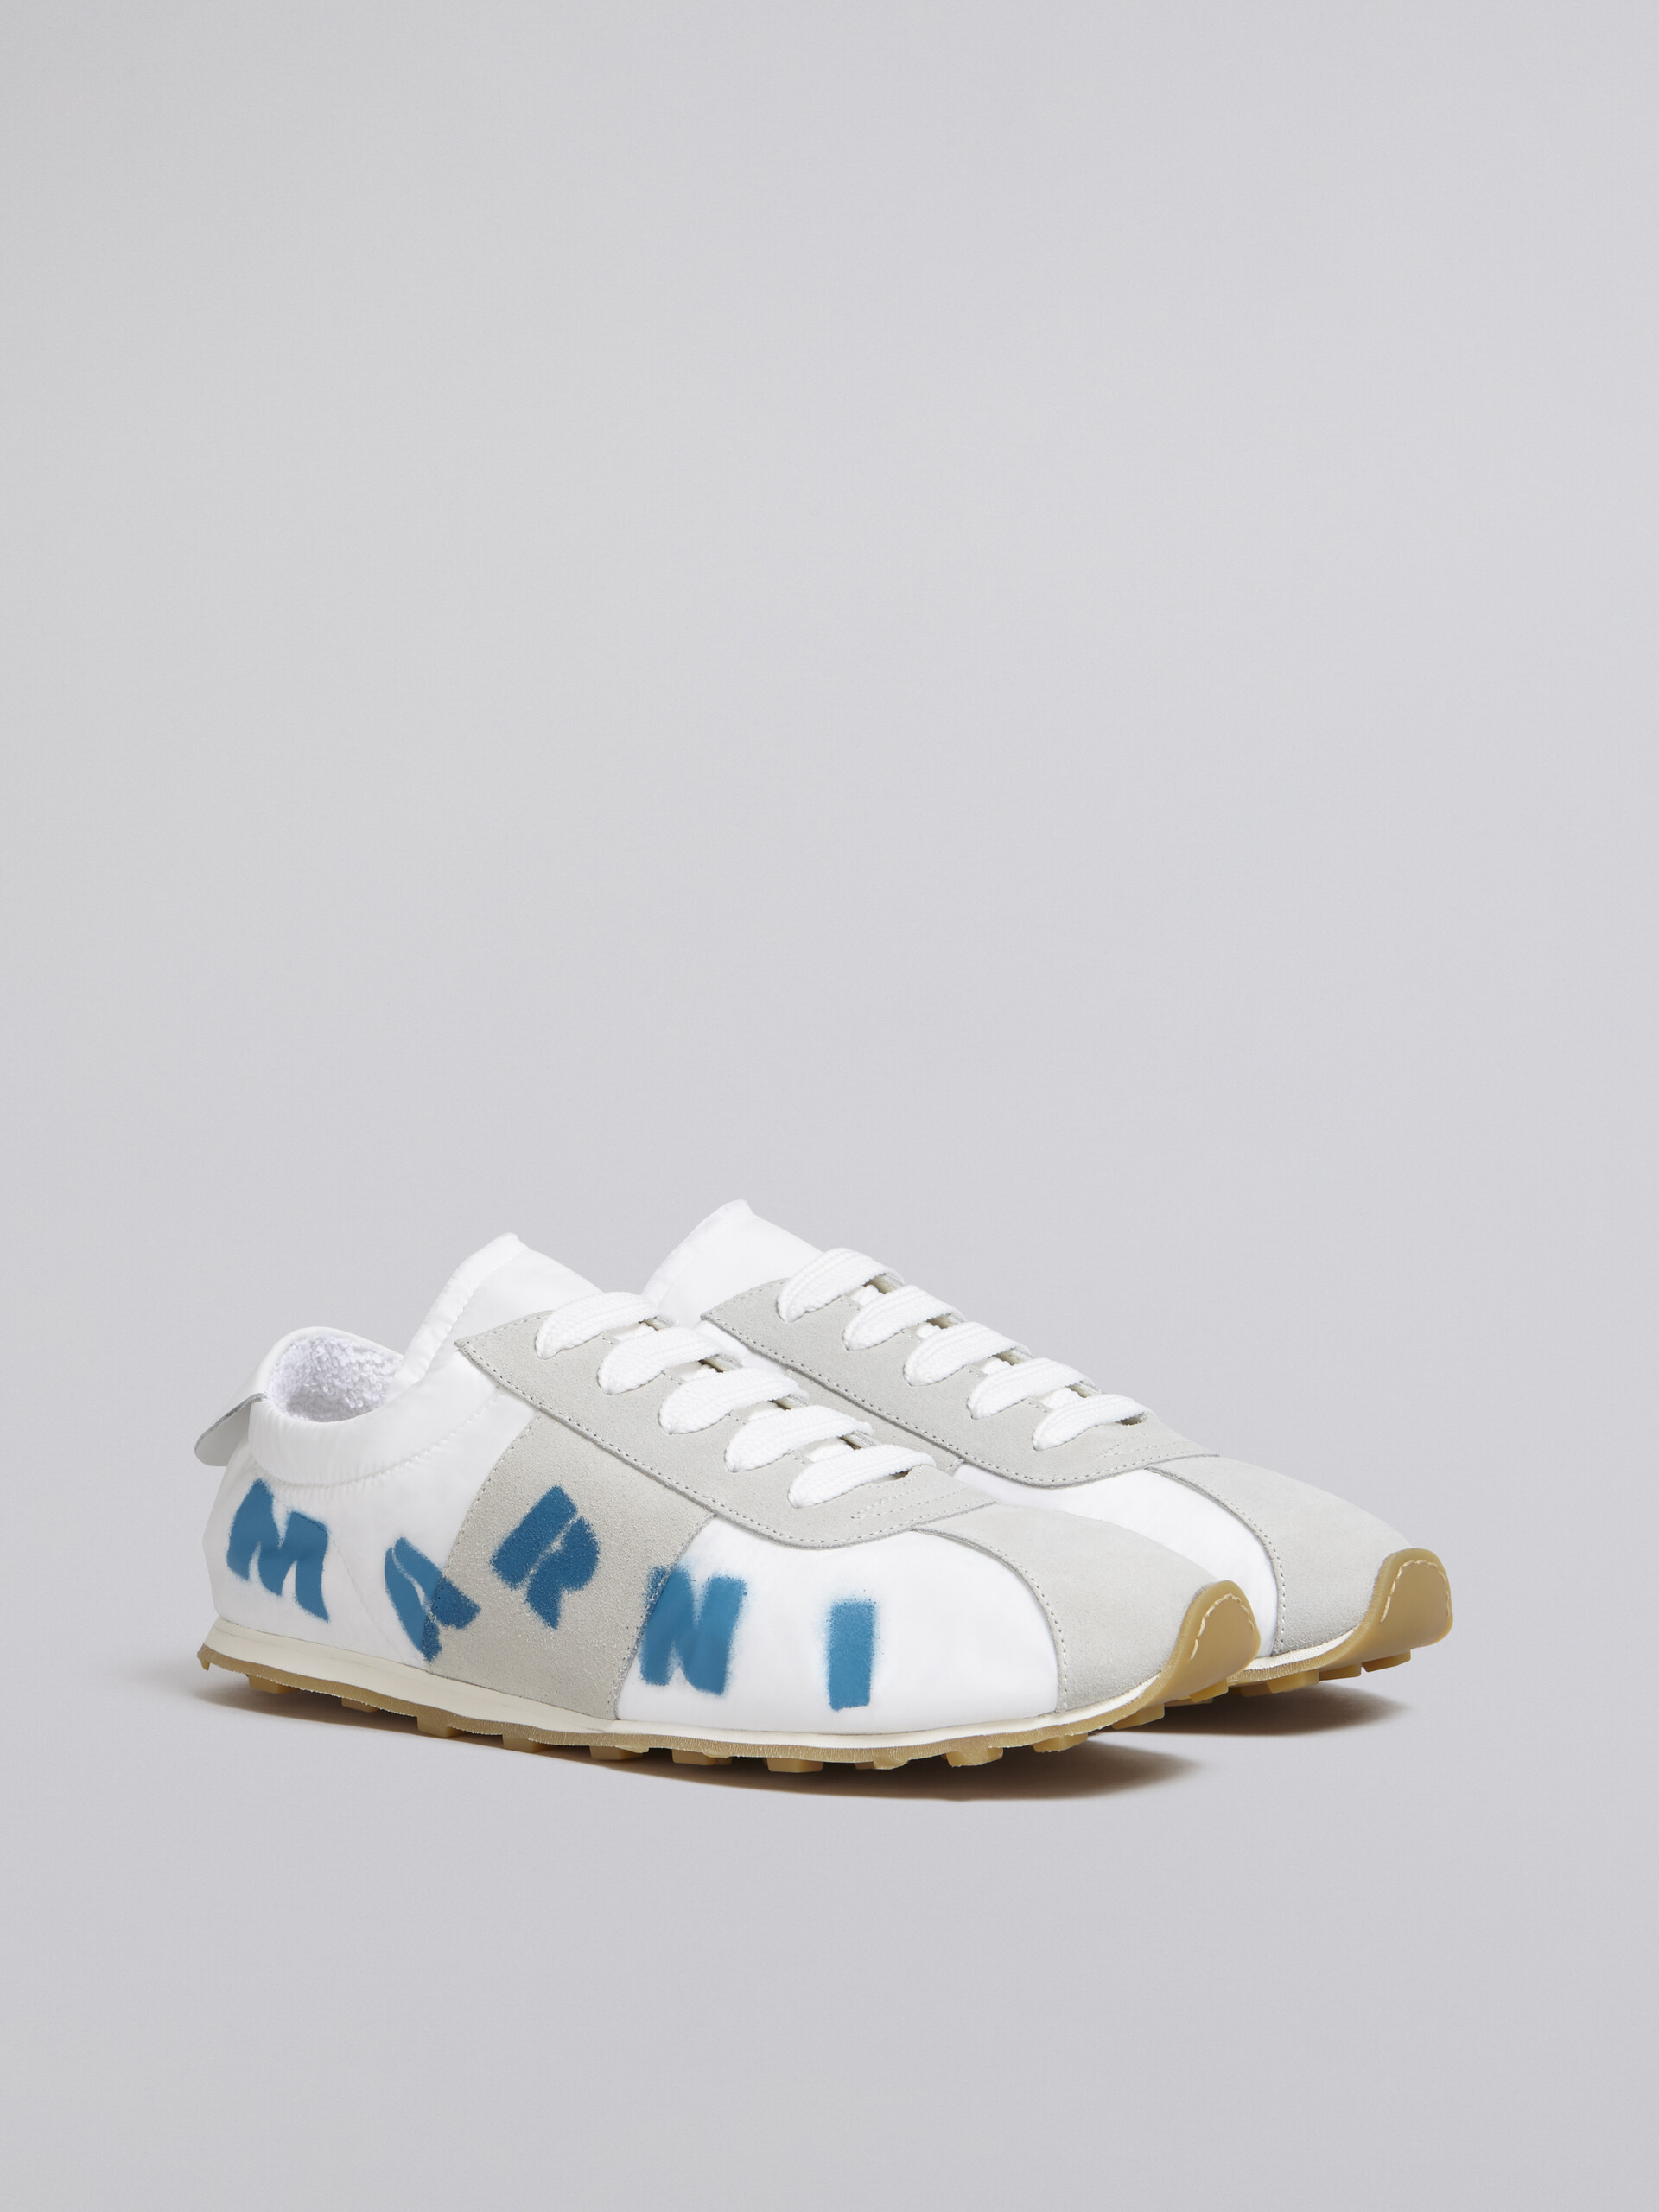 White polyamide sneaker with airbrushed Marni logo - Sneakers - Image 2